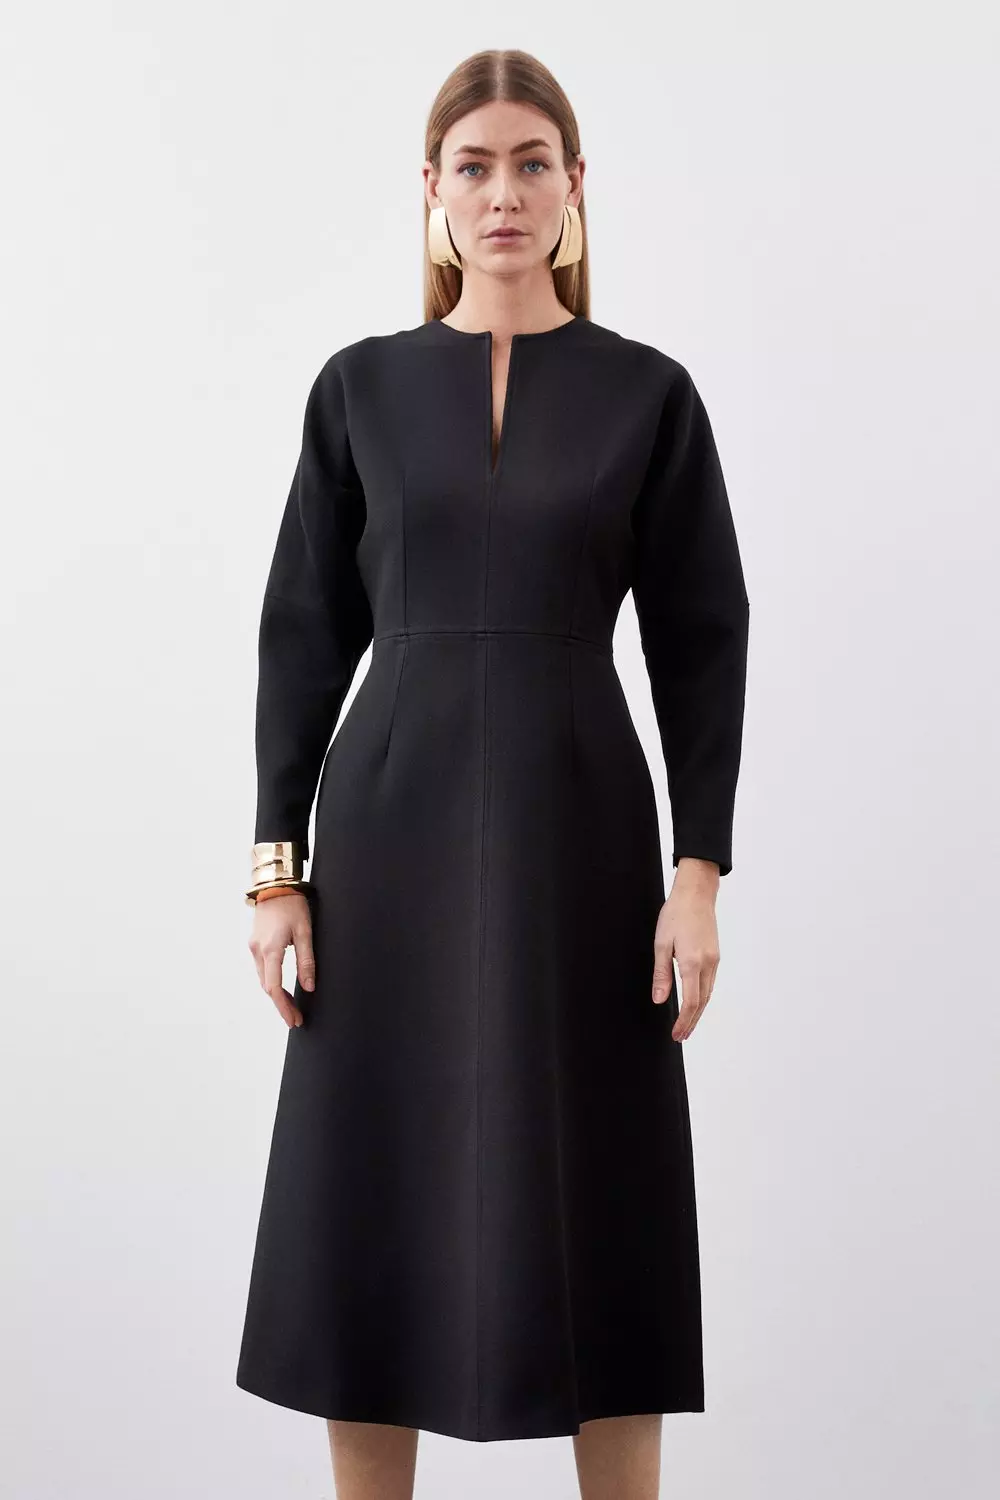 Structured Crepe Tailored Keyhole Rounded A Line Midaxi Dress | Karen Millen